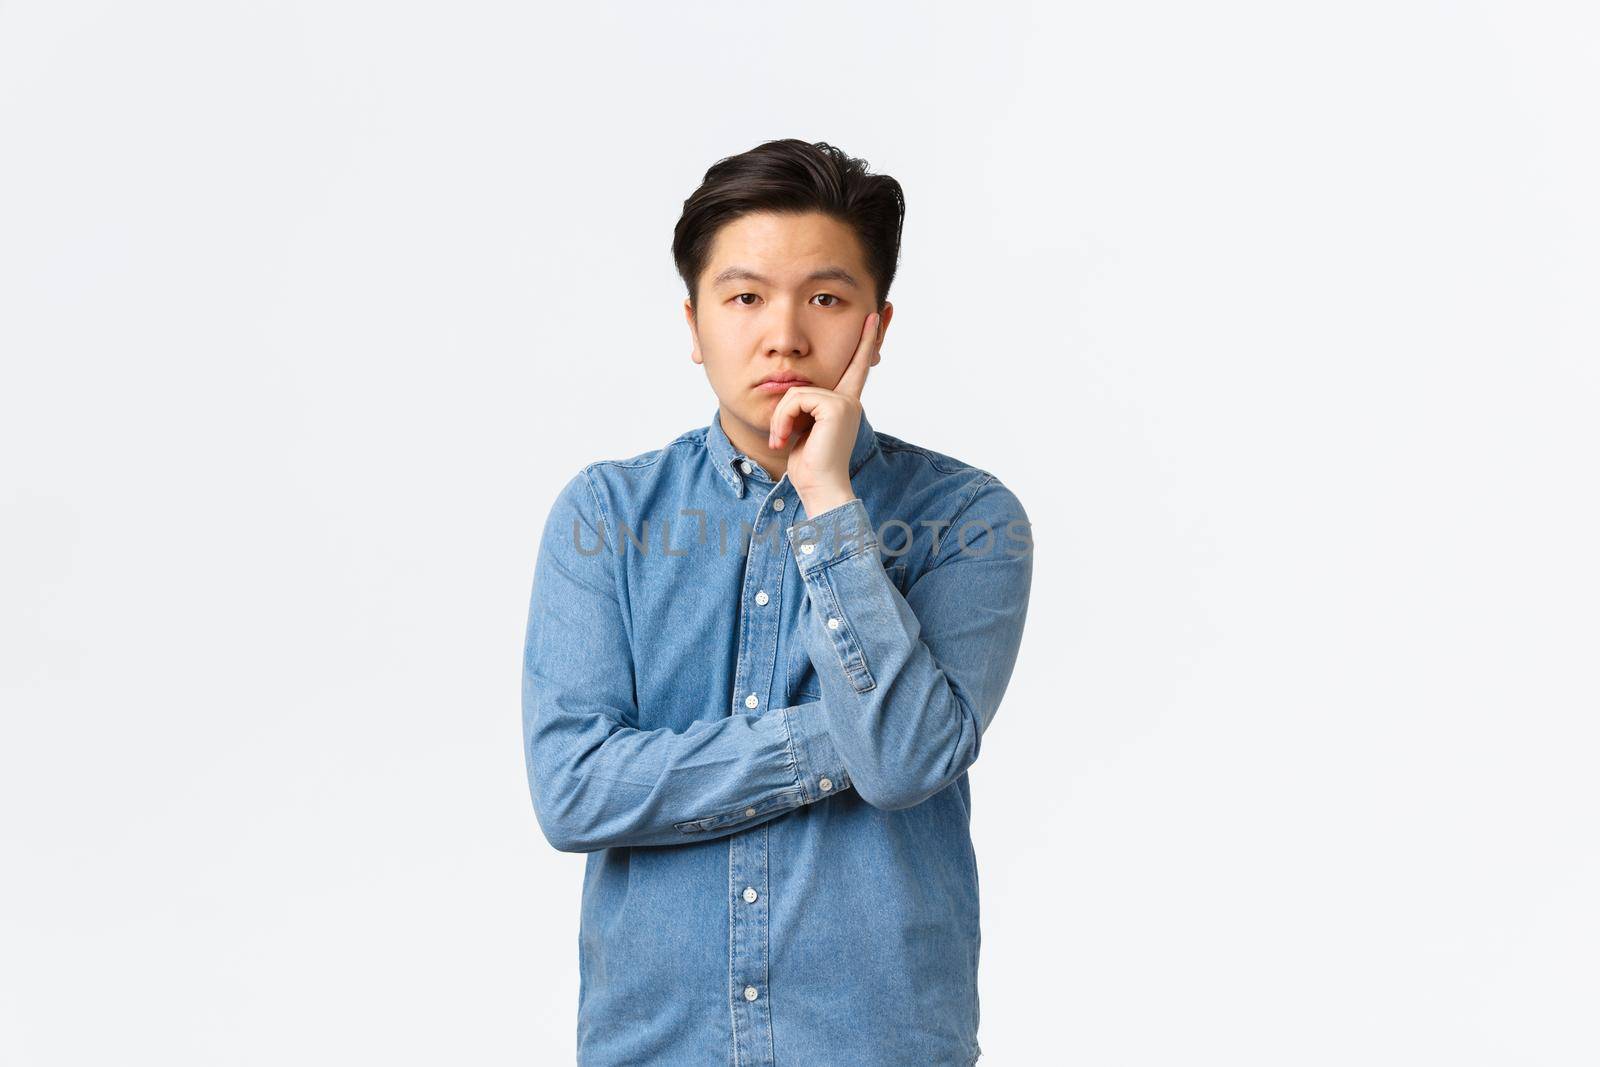 Bored and uninterested asian male in blue shirt, looking unamused and careless at camera, listening boring speech, standing displeased and annoyed over white background, tired of person.